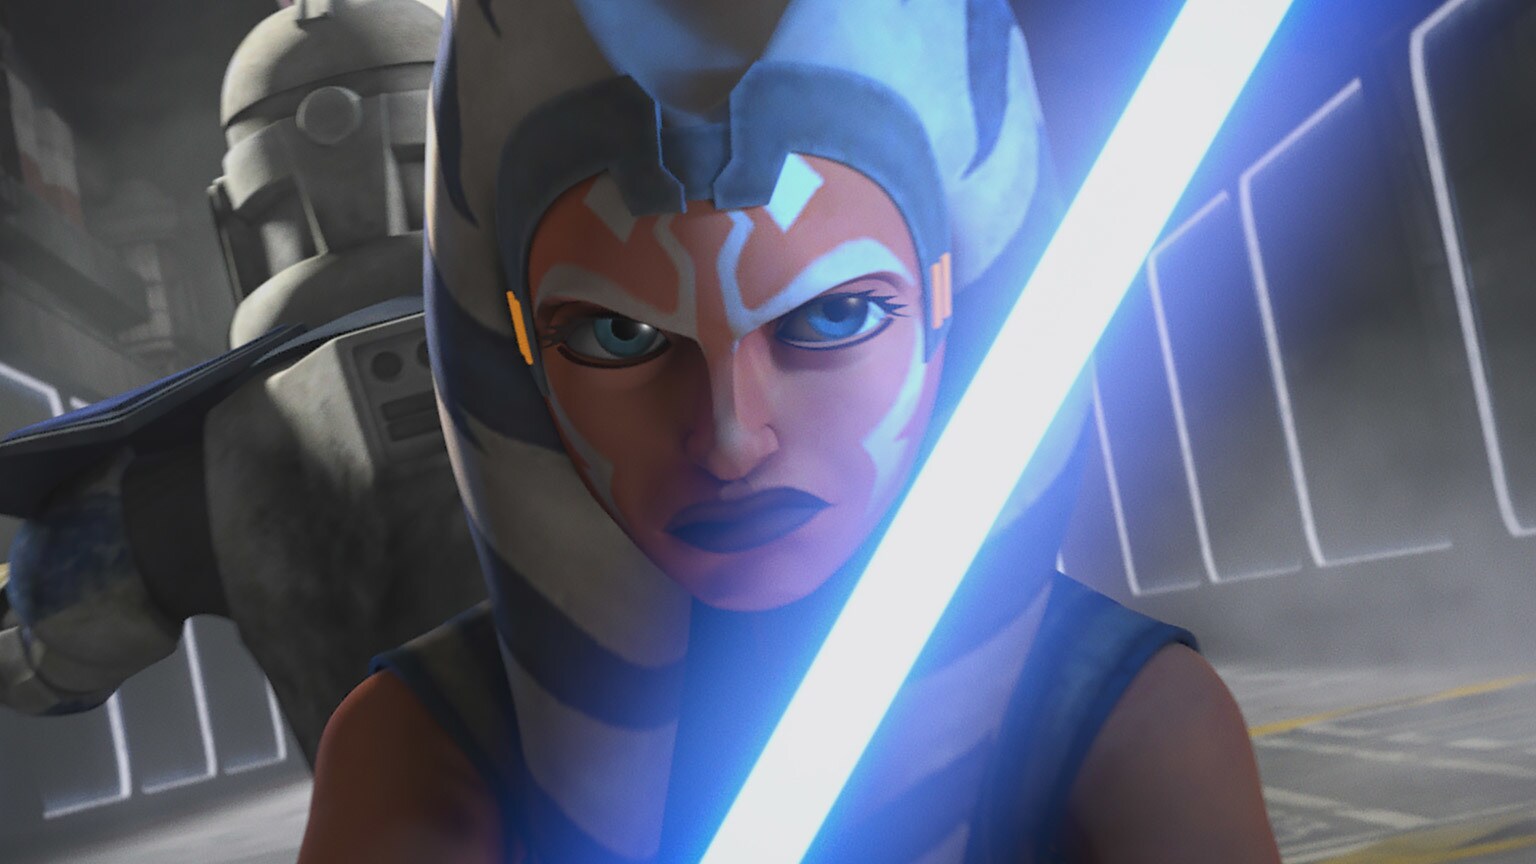 The Clone Wars Rewatch: The War Ends in "Victory and Death"